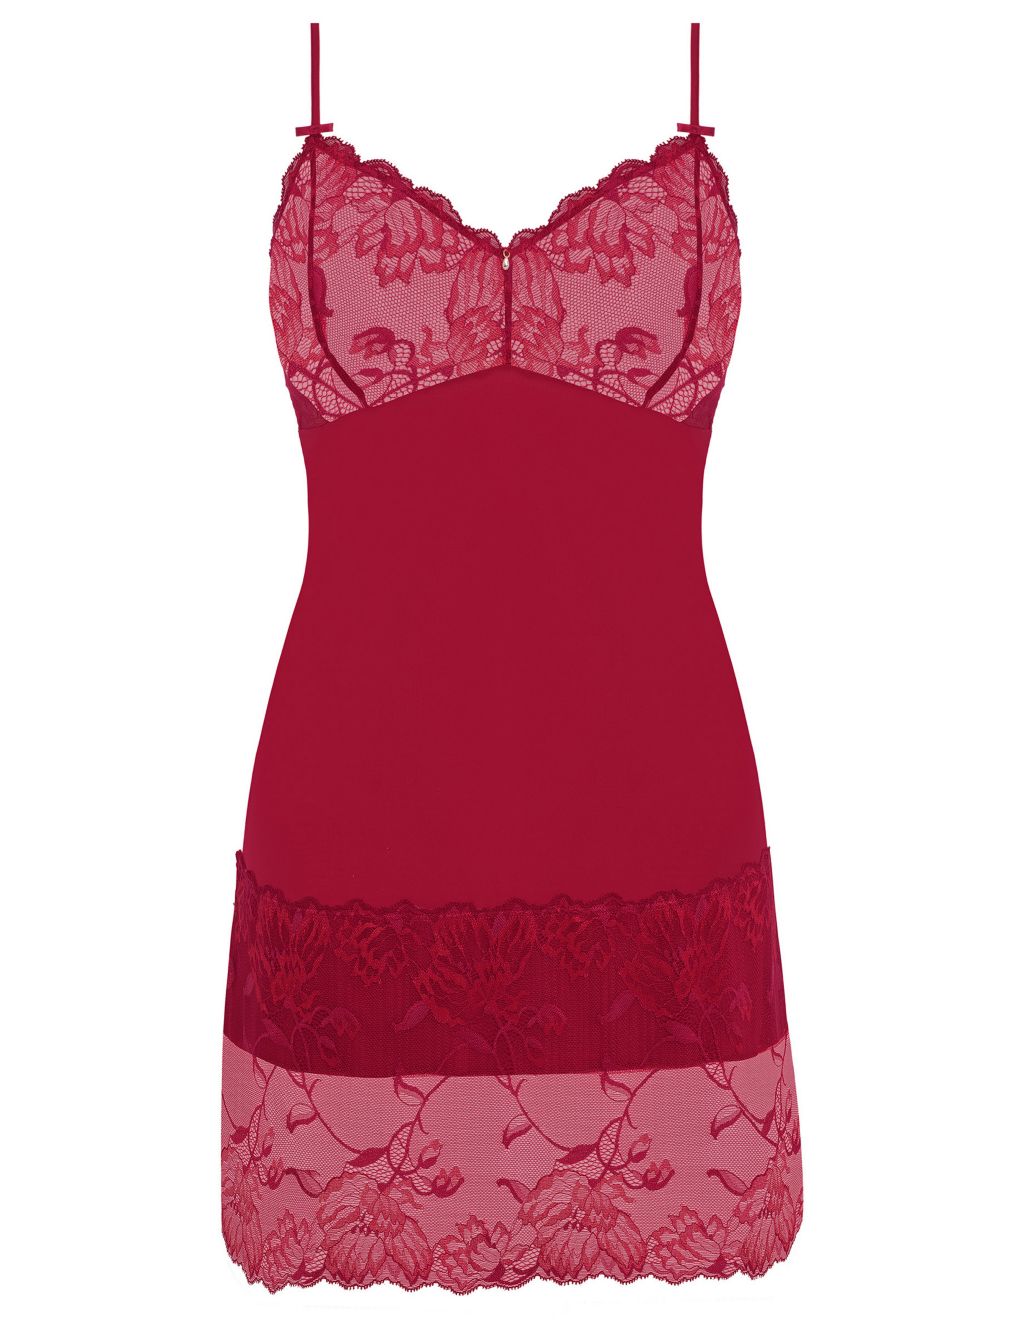 Aubree Strappy Lace Chemise image 2